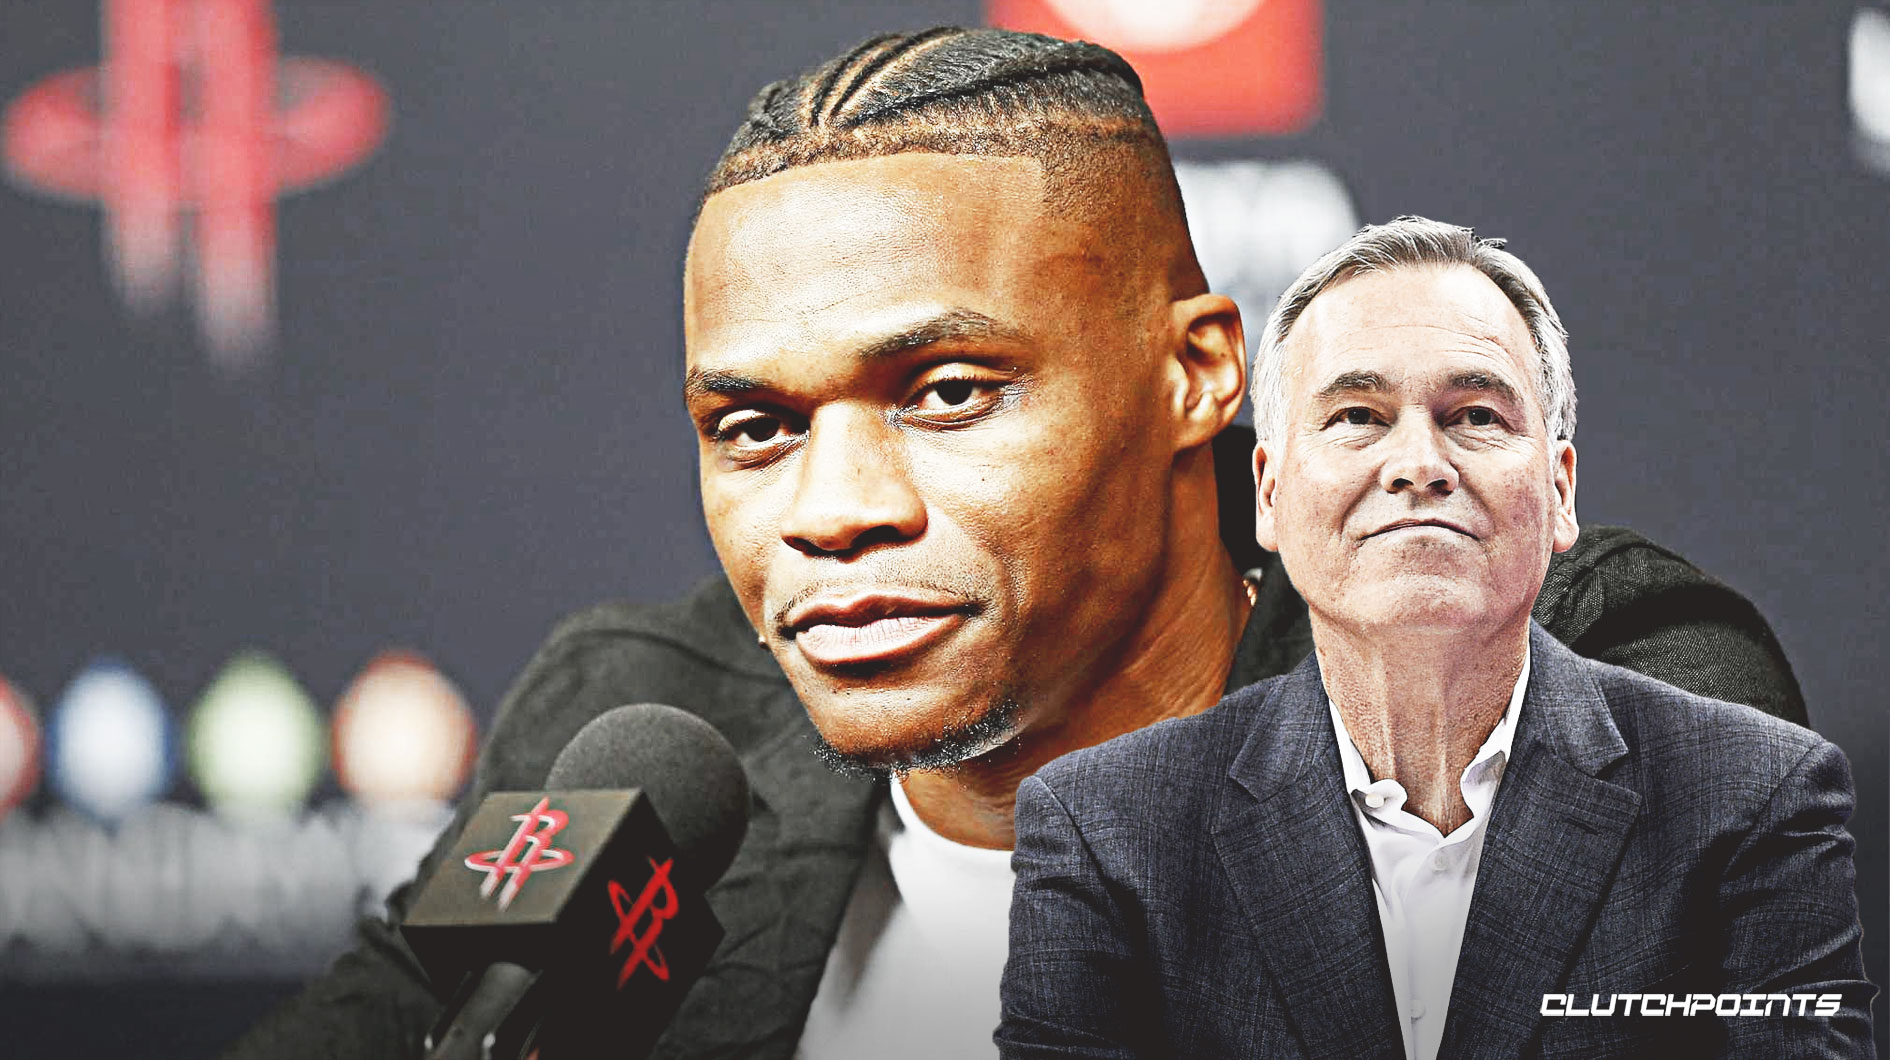 Rockets, Mike D'Antoni, Russell Westbrook